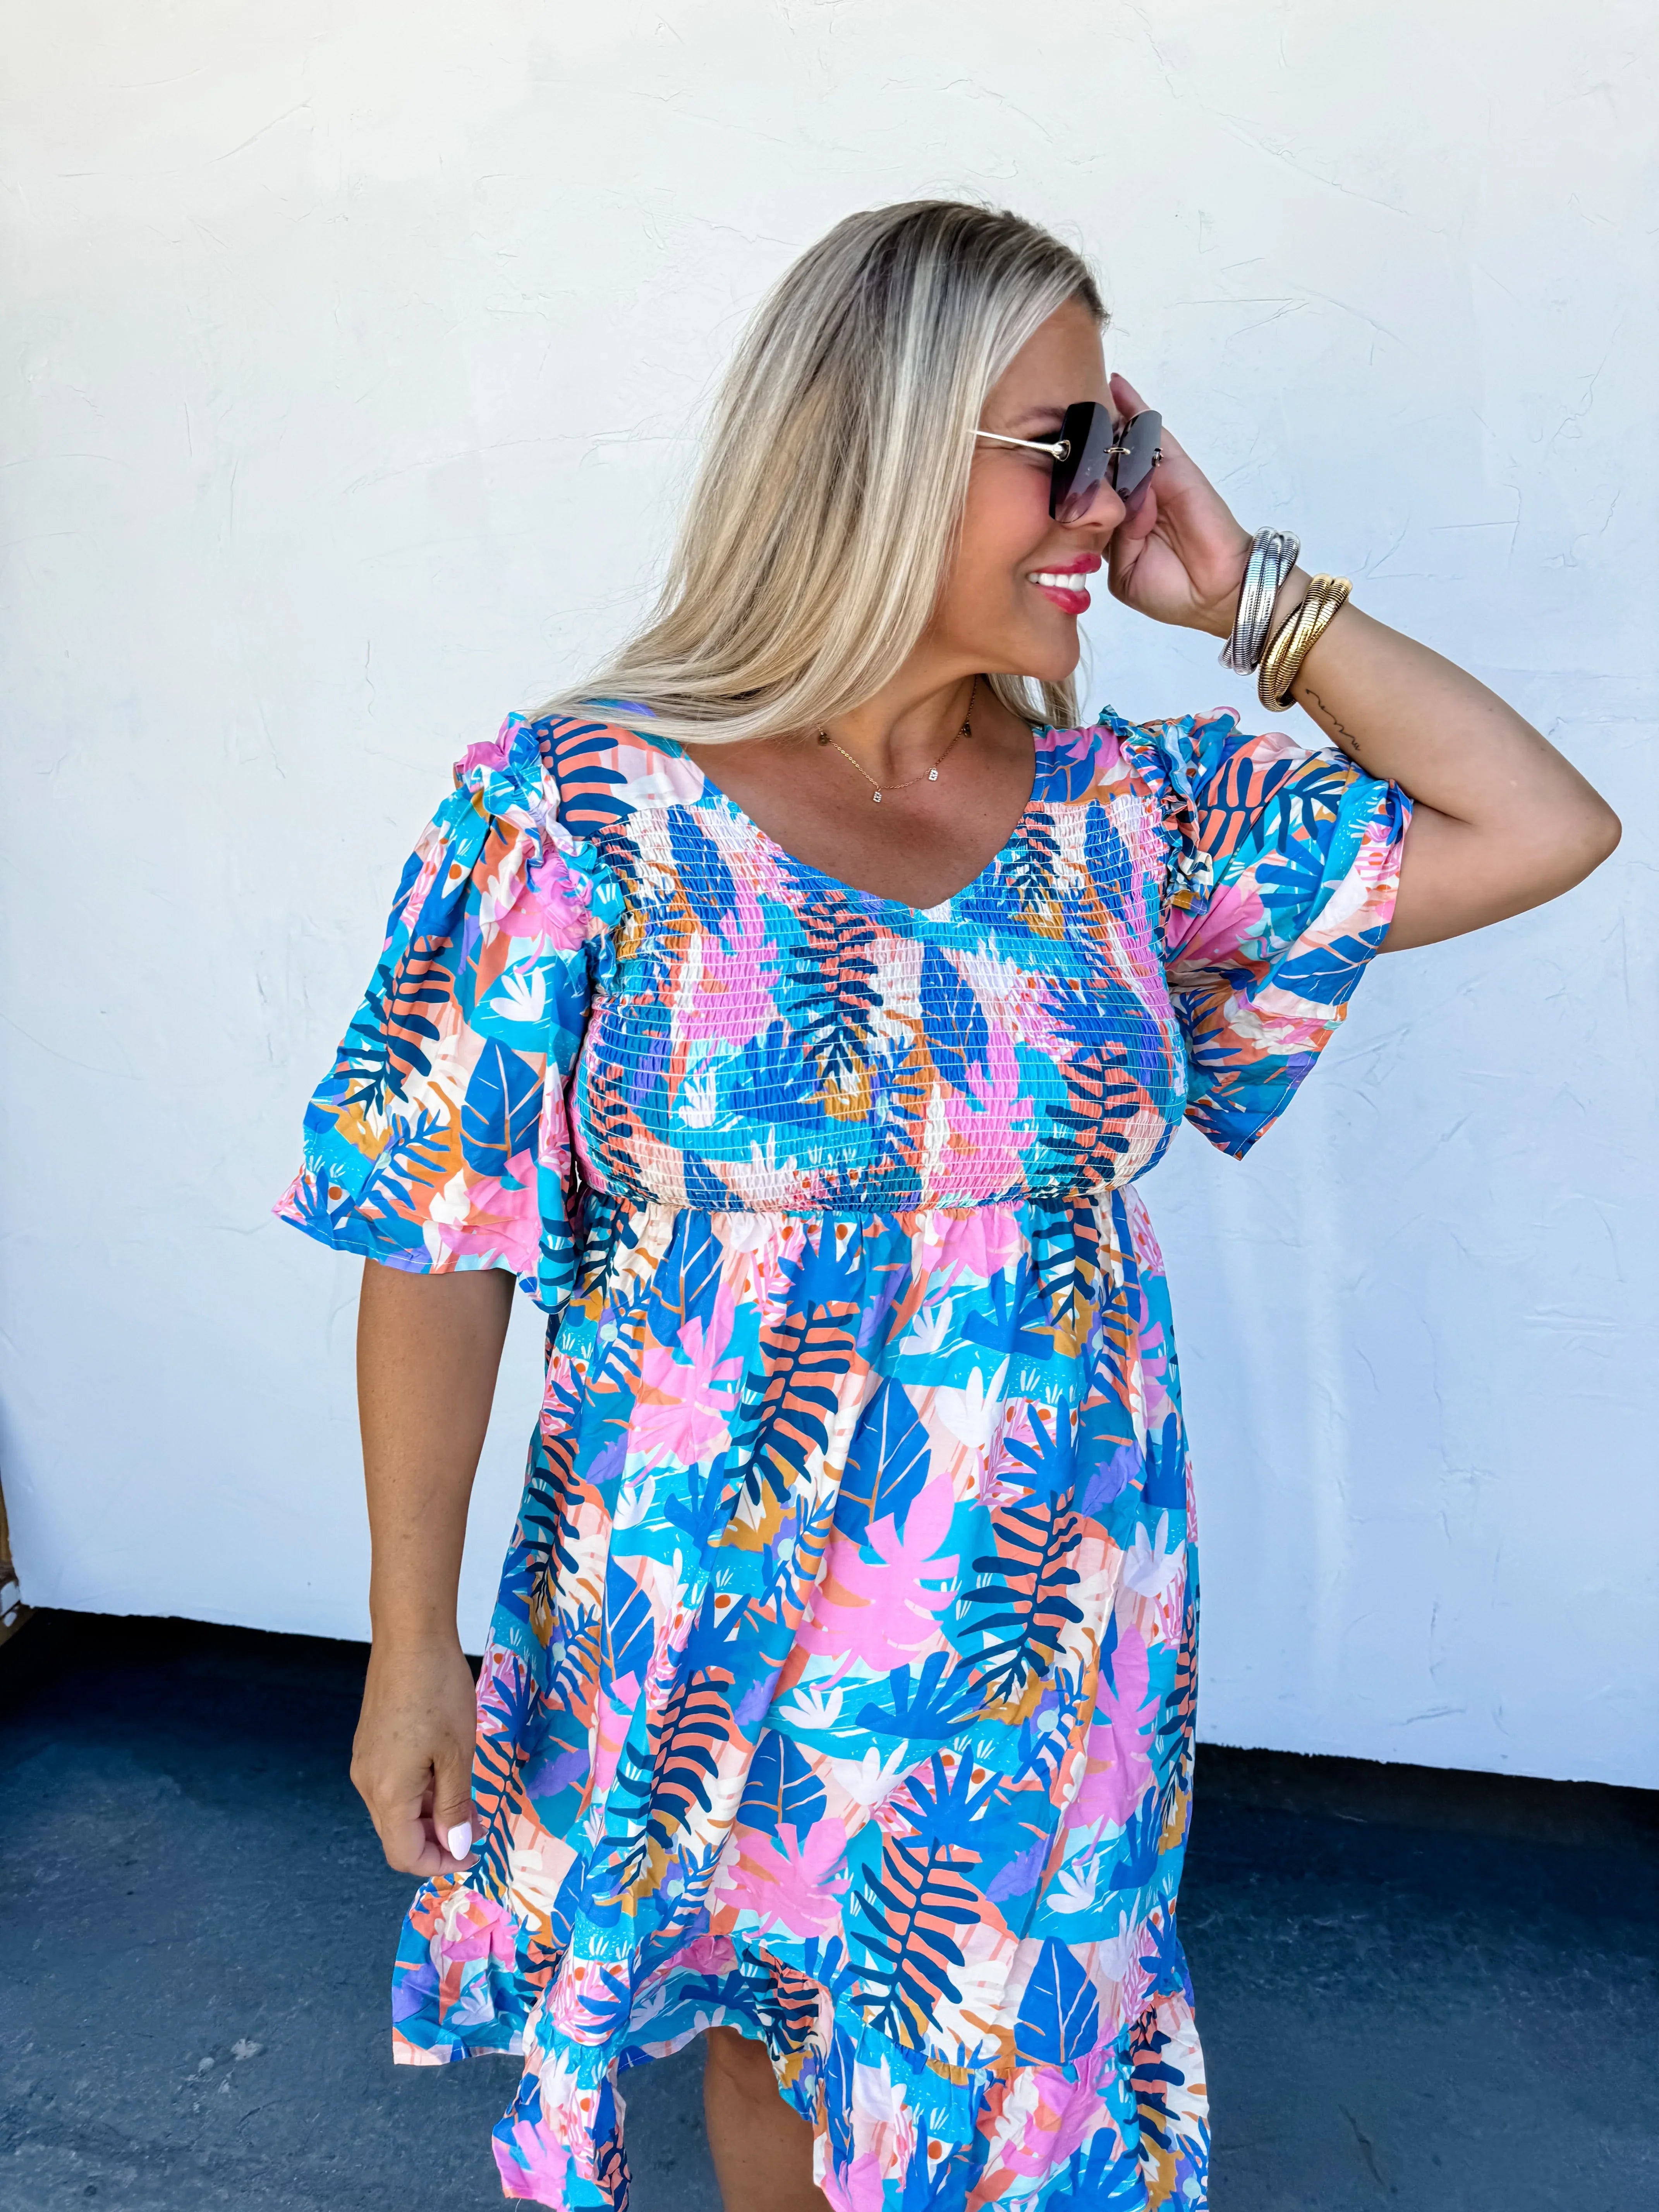 PREORDER: Cabana Floral Dress (Ships Early July)